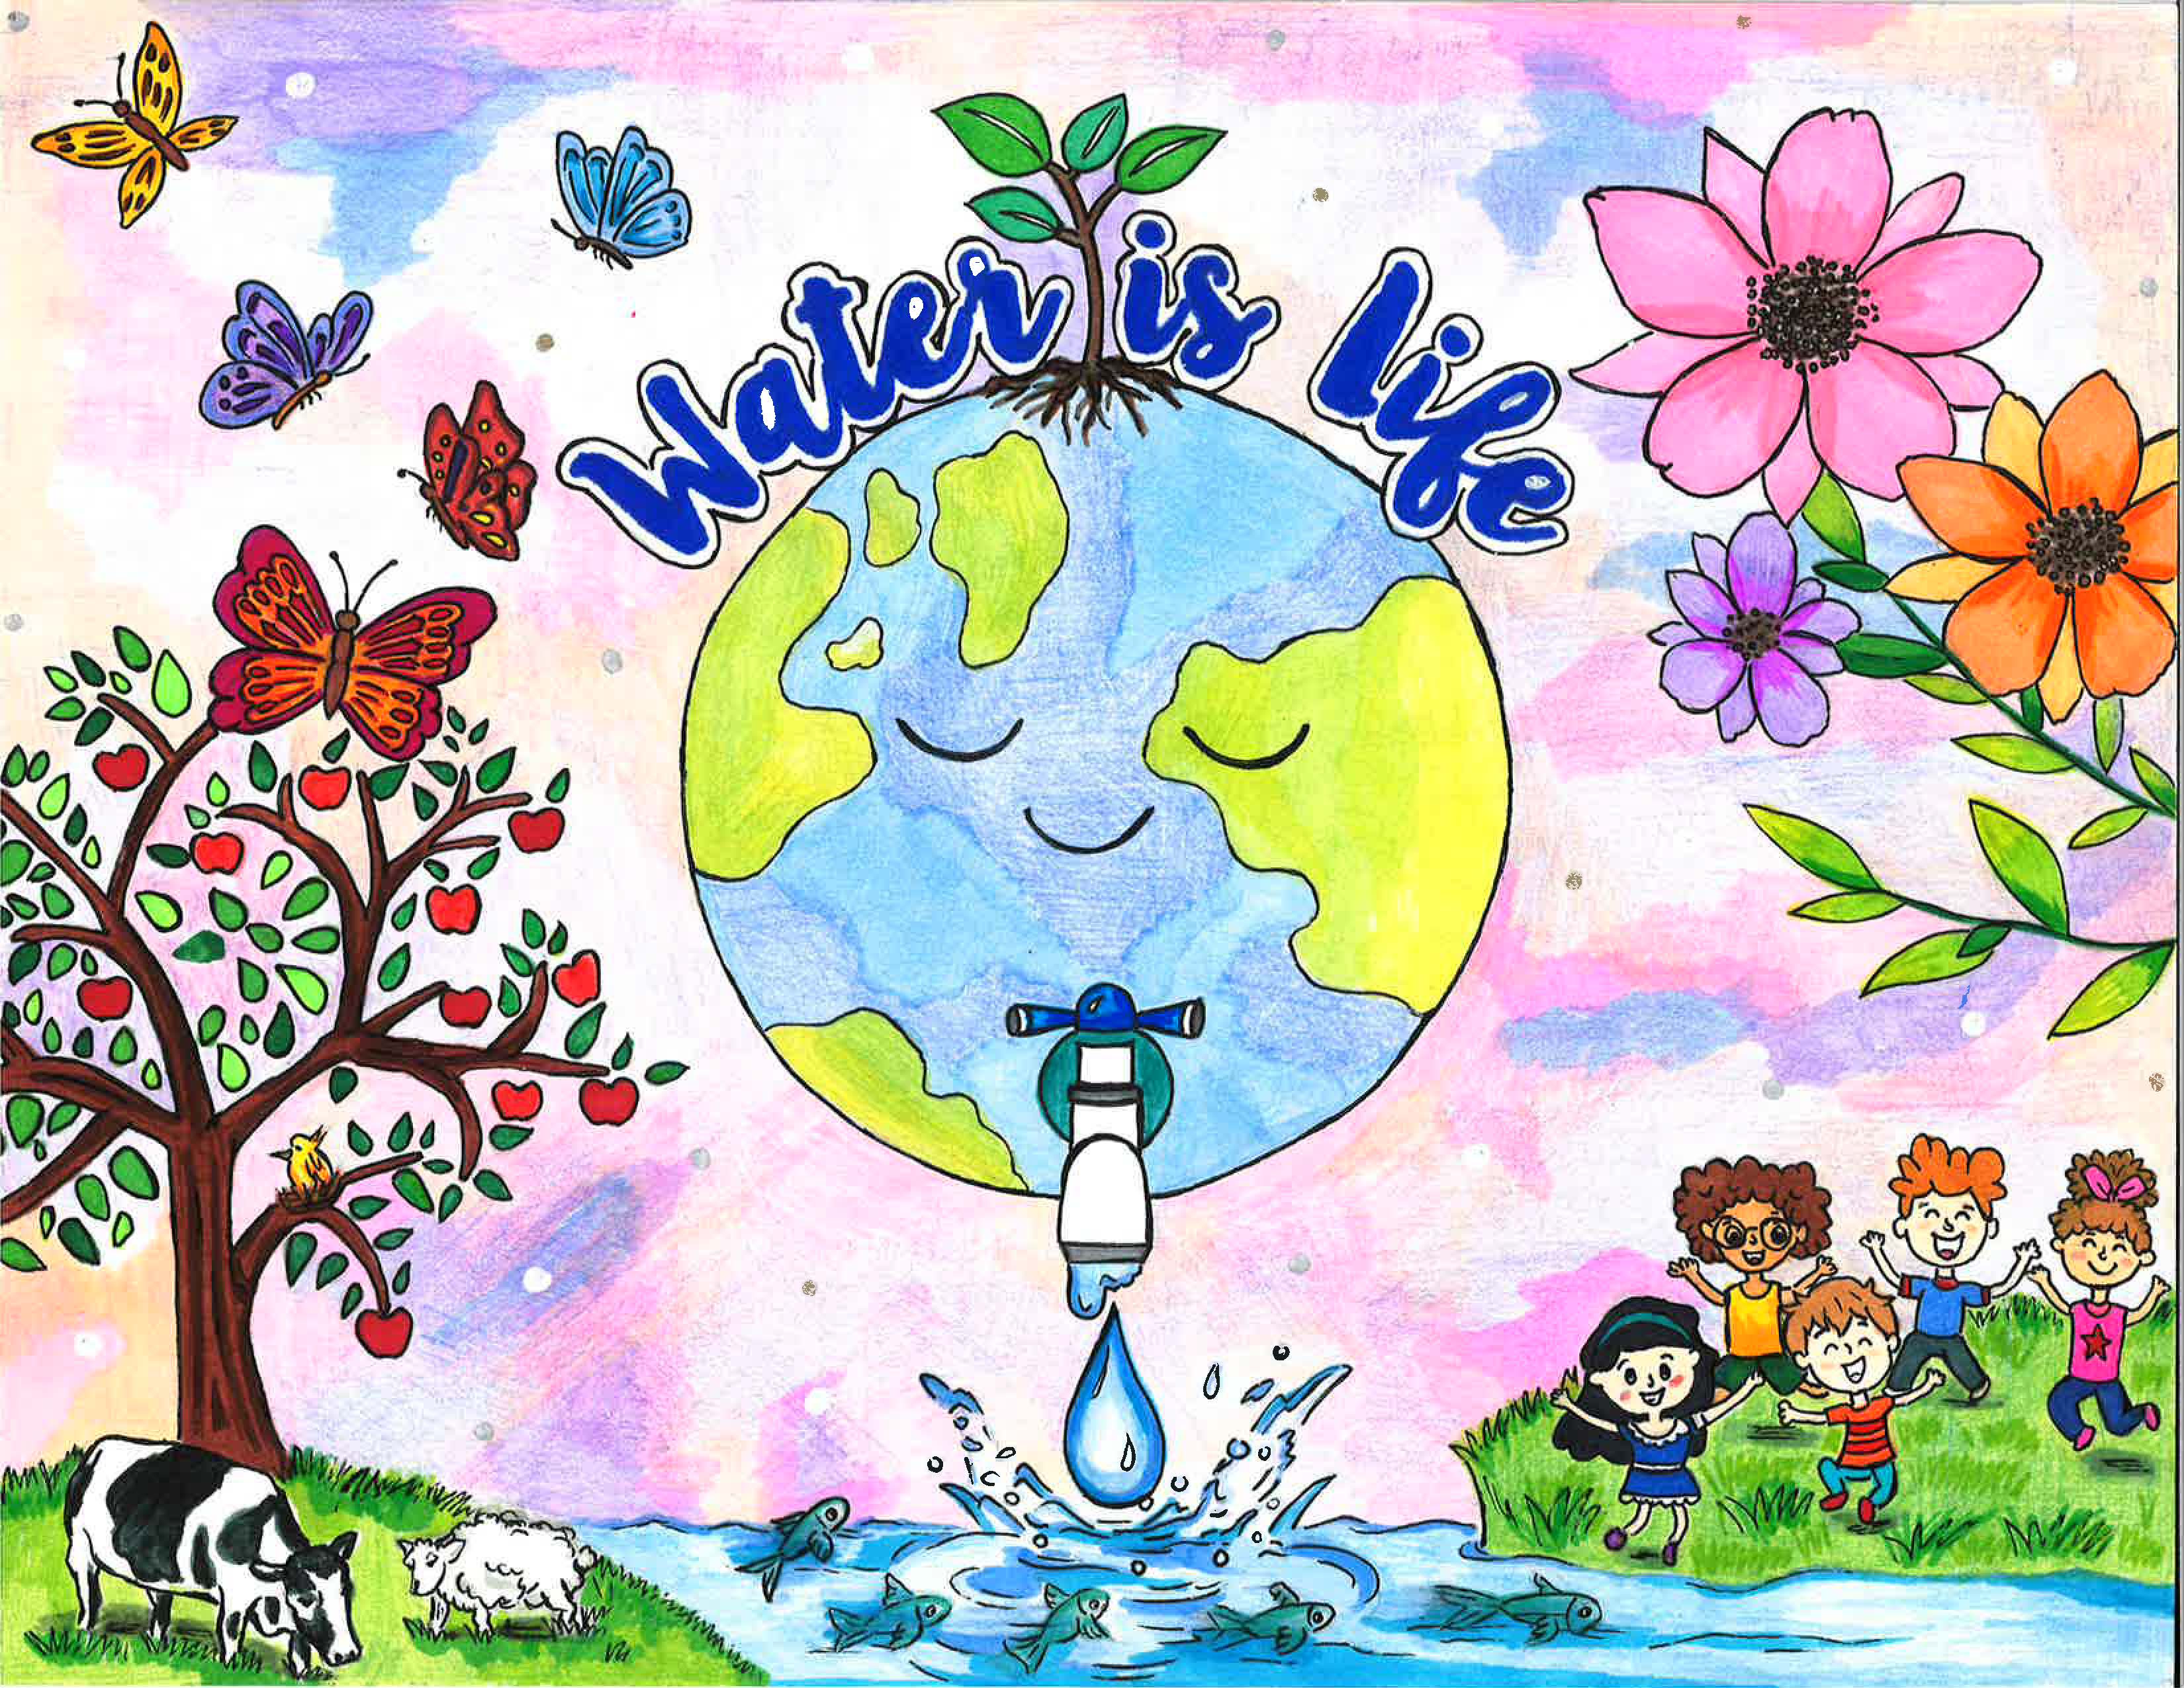 How to draw water conservation drawing | Save water drawing - YouTube-omiya.com.vn